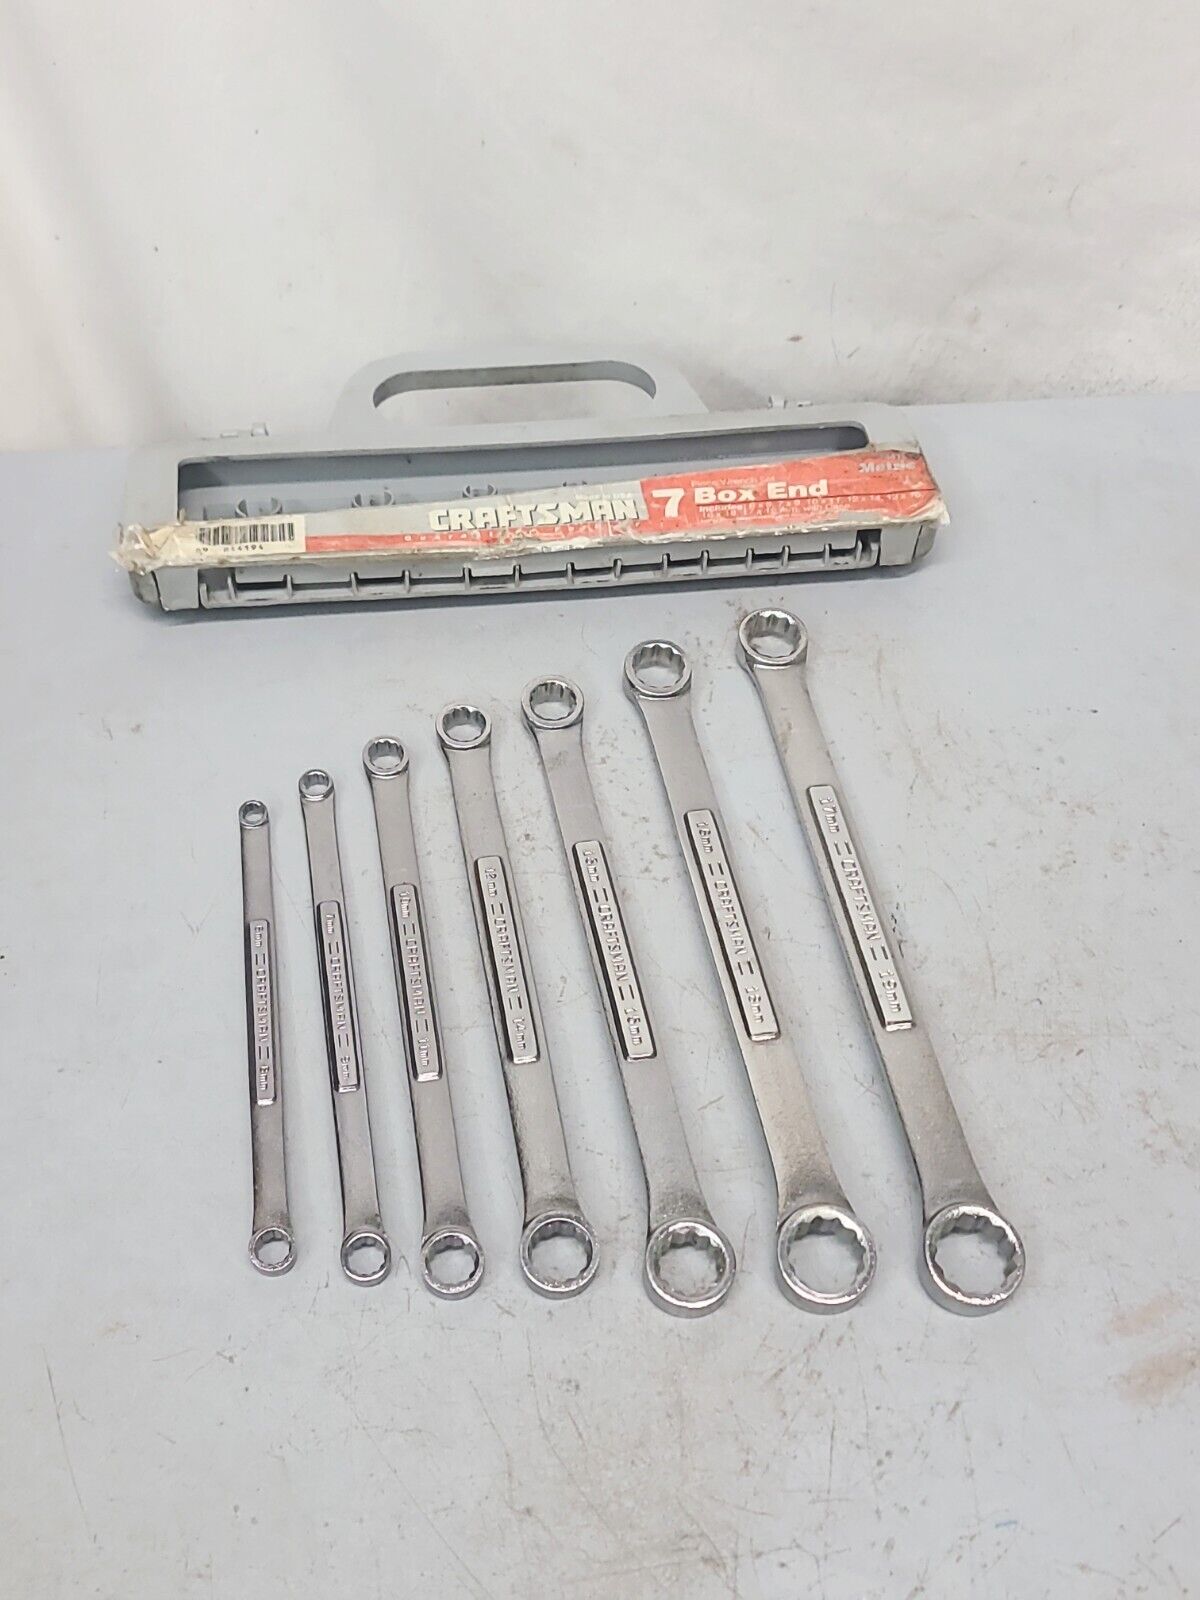 NOS VINTAGE CRAFTSMAN VA USA METRIC 12PT DOUBLE BOX END WRENCH SET 6MM TO 19MM